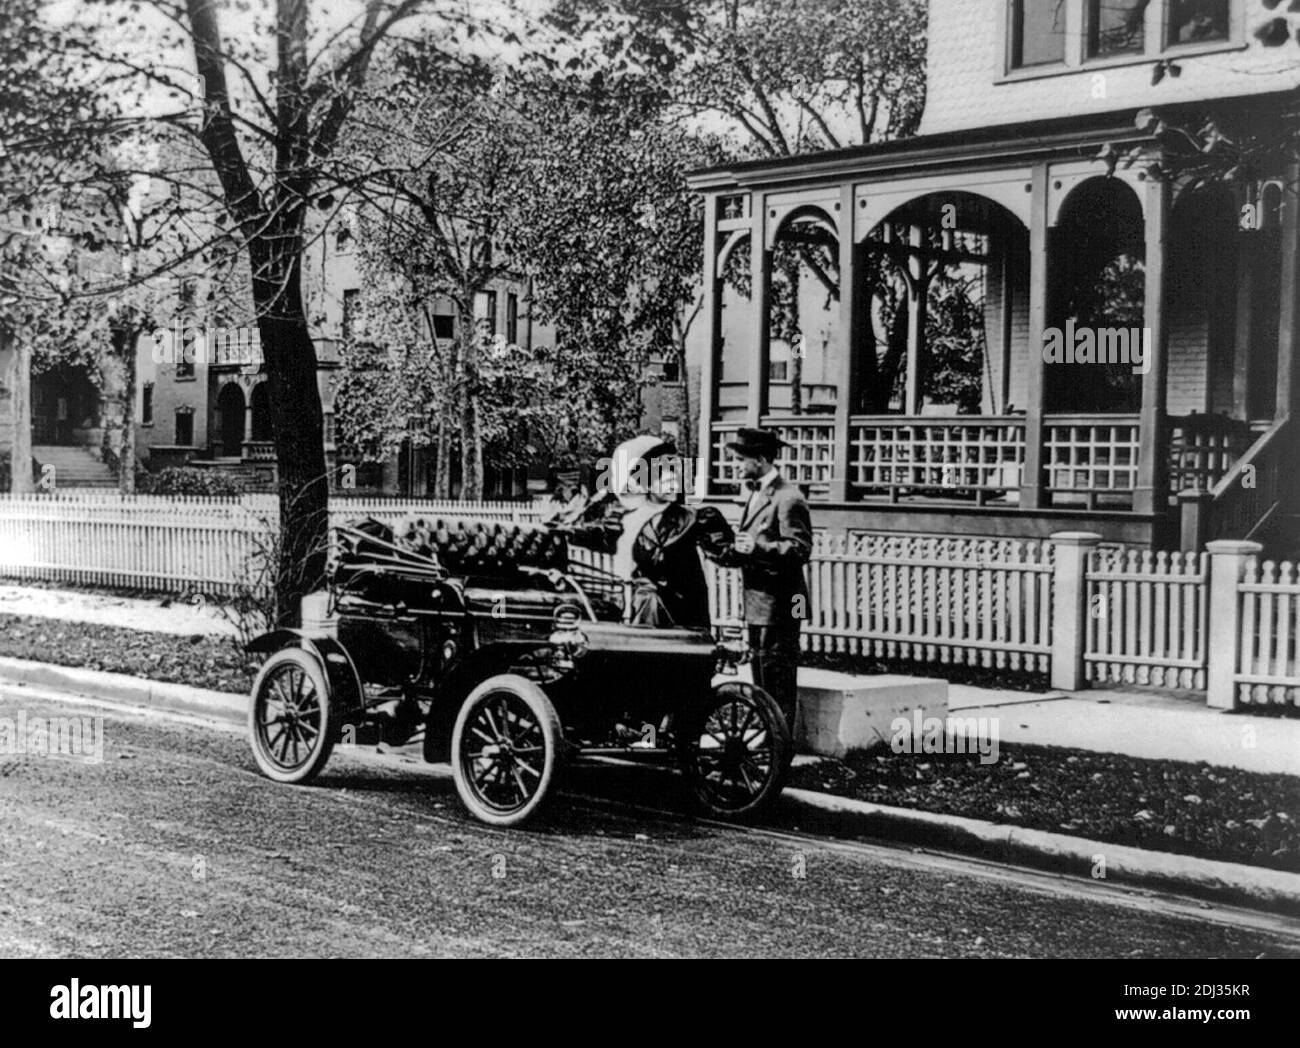 Oldsmobile -Photograph shows man helping woman into car with top down parked on tree-lined street in front of house, circa 1907 Stock Photo